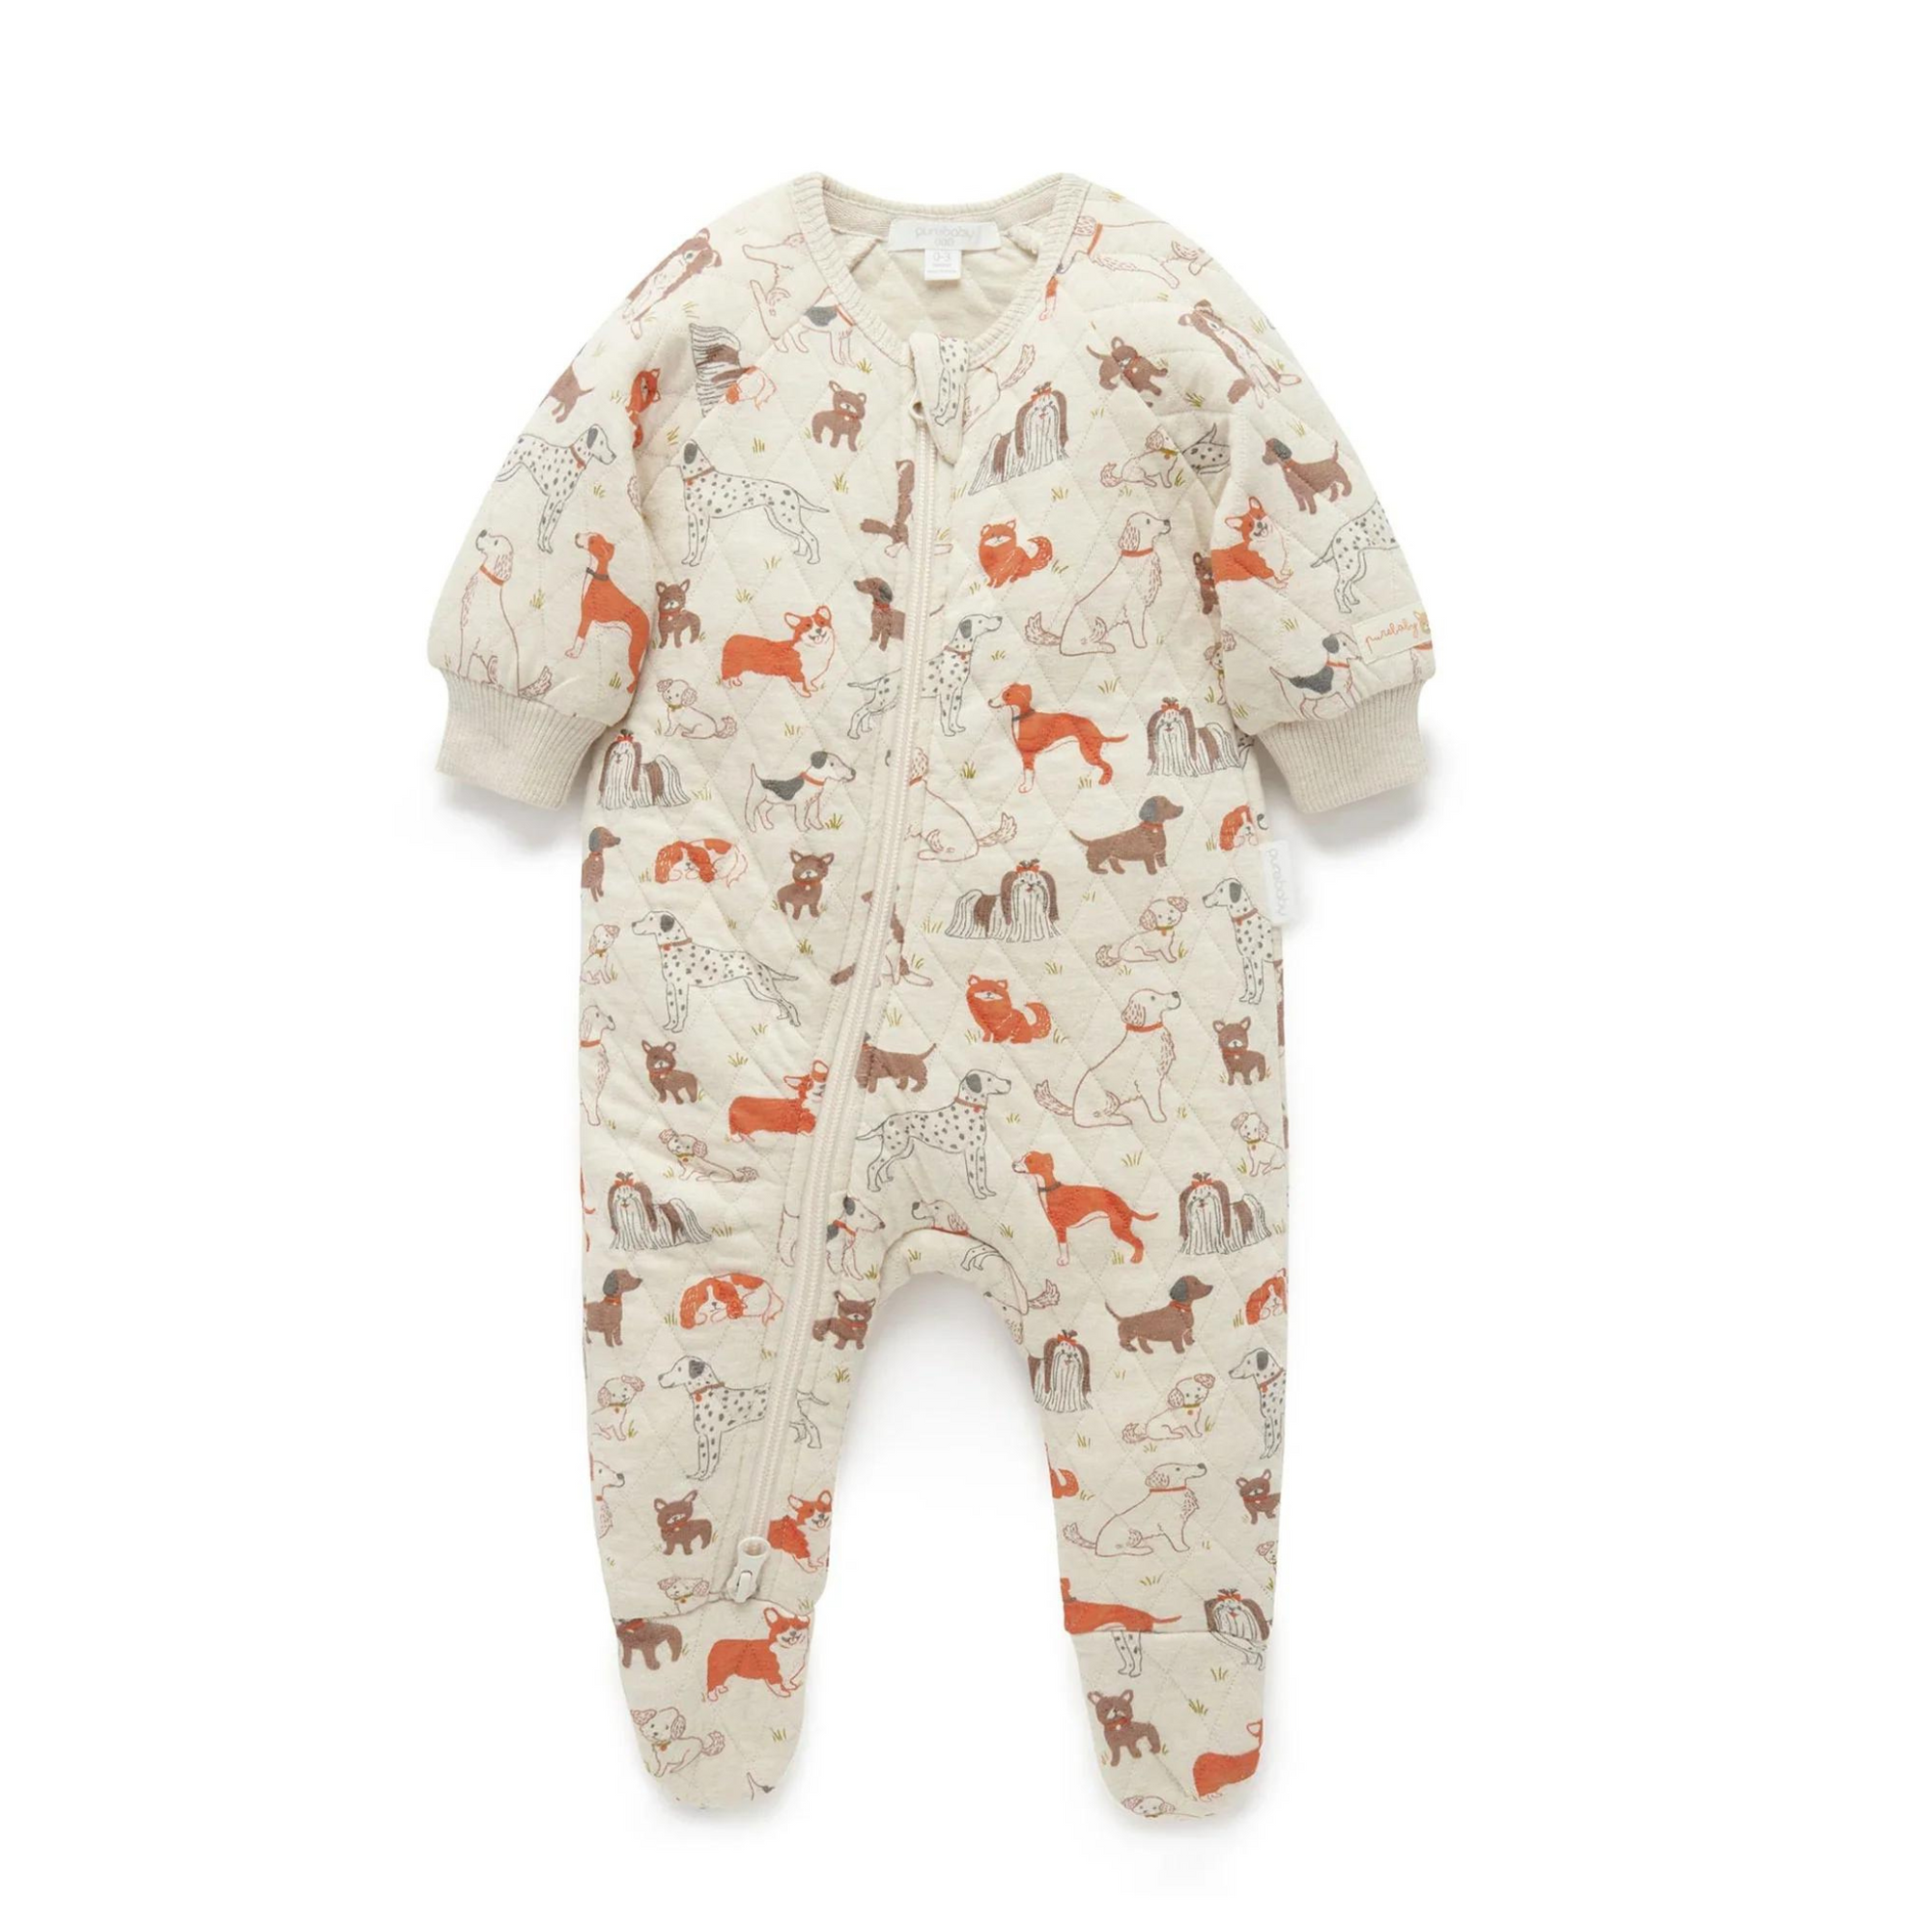 Purebaby Doggy Quilted Growsuit